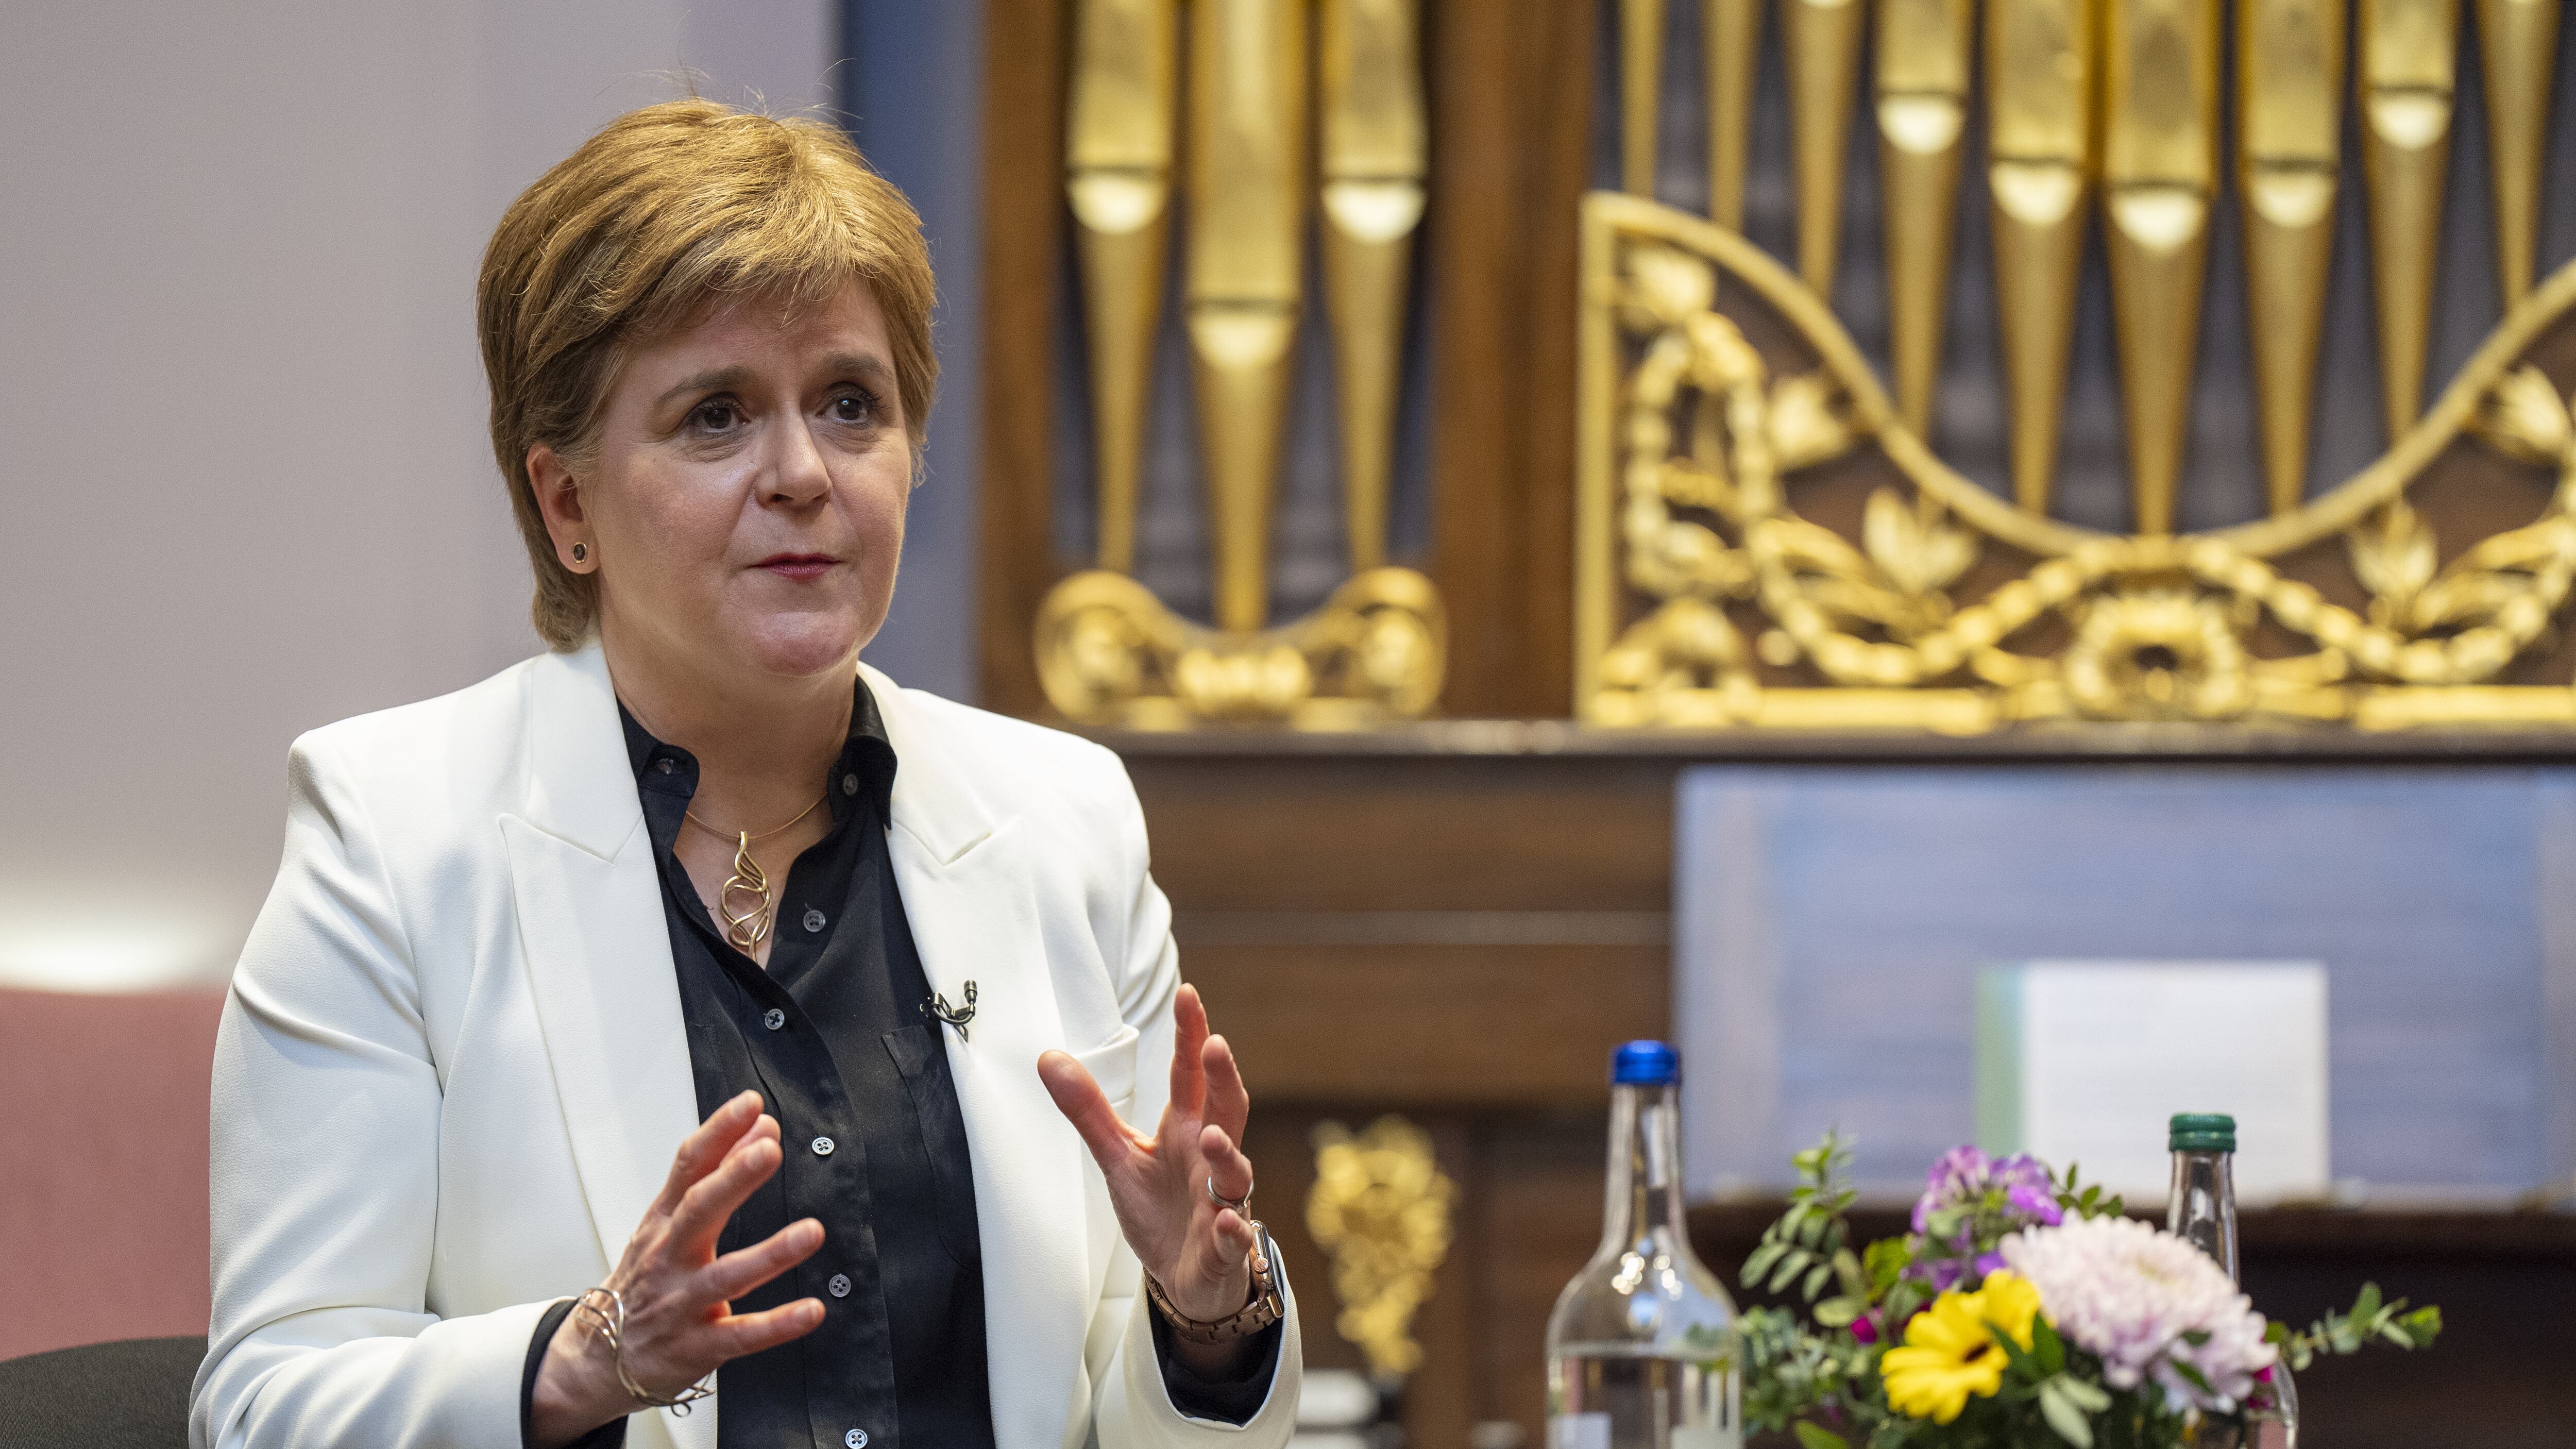 Nicola Sturgeon reacted in the minutes after the exit poll was released